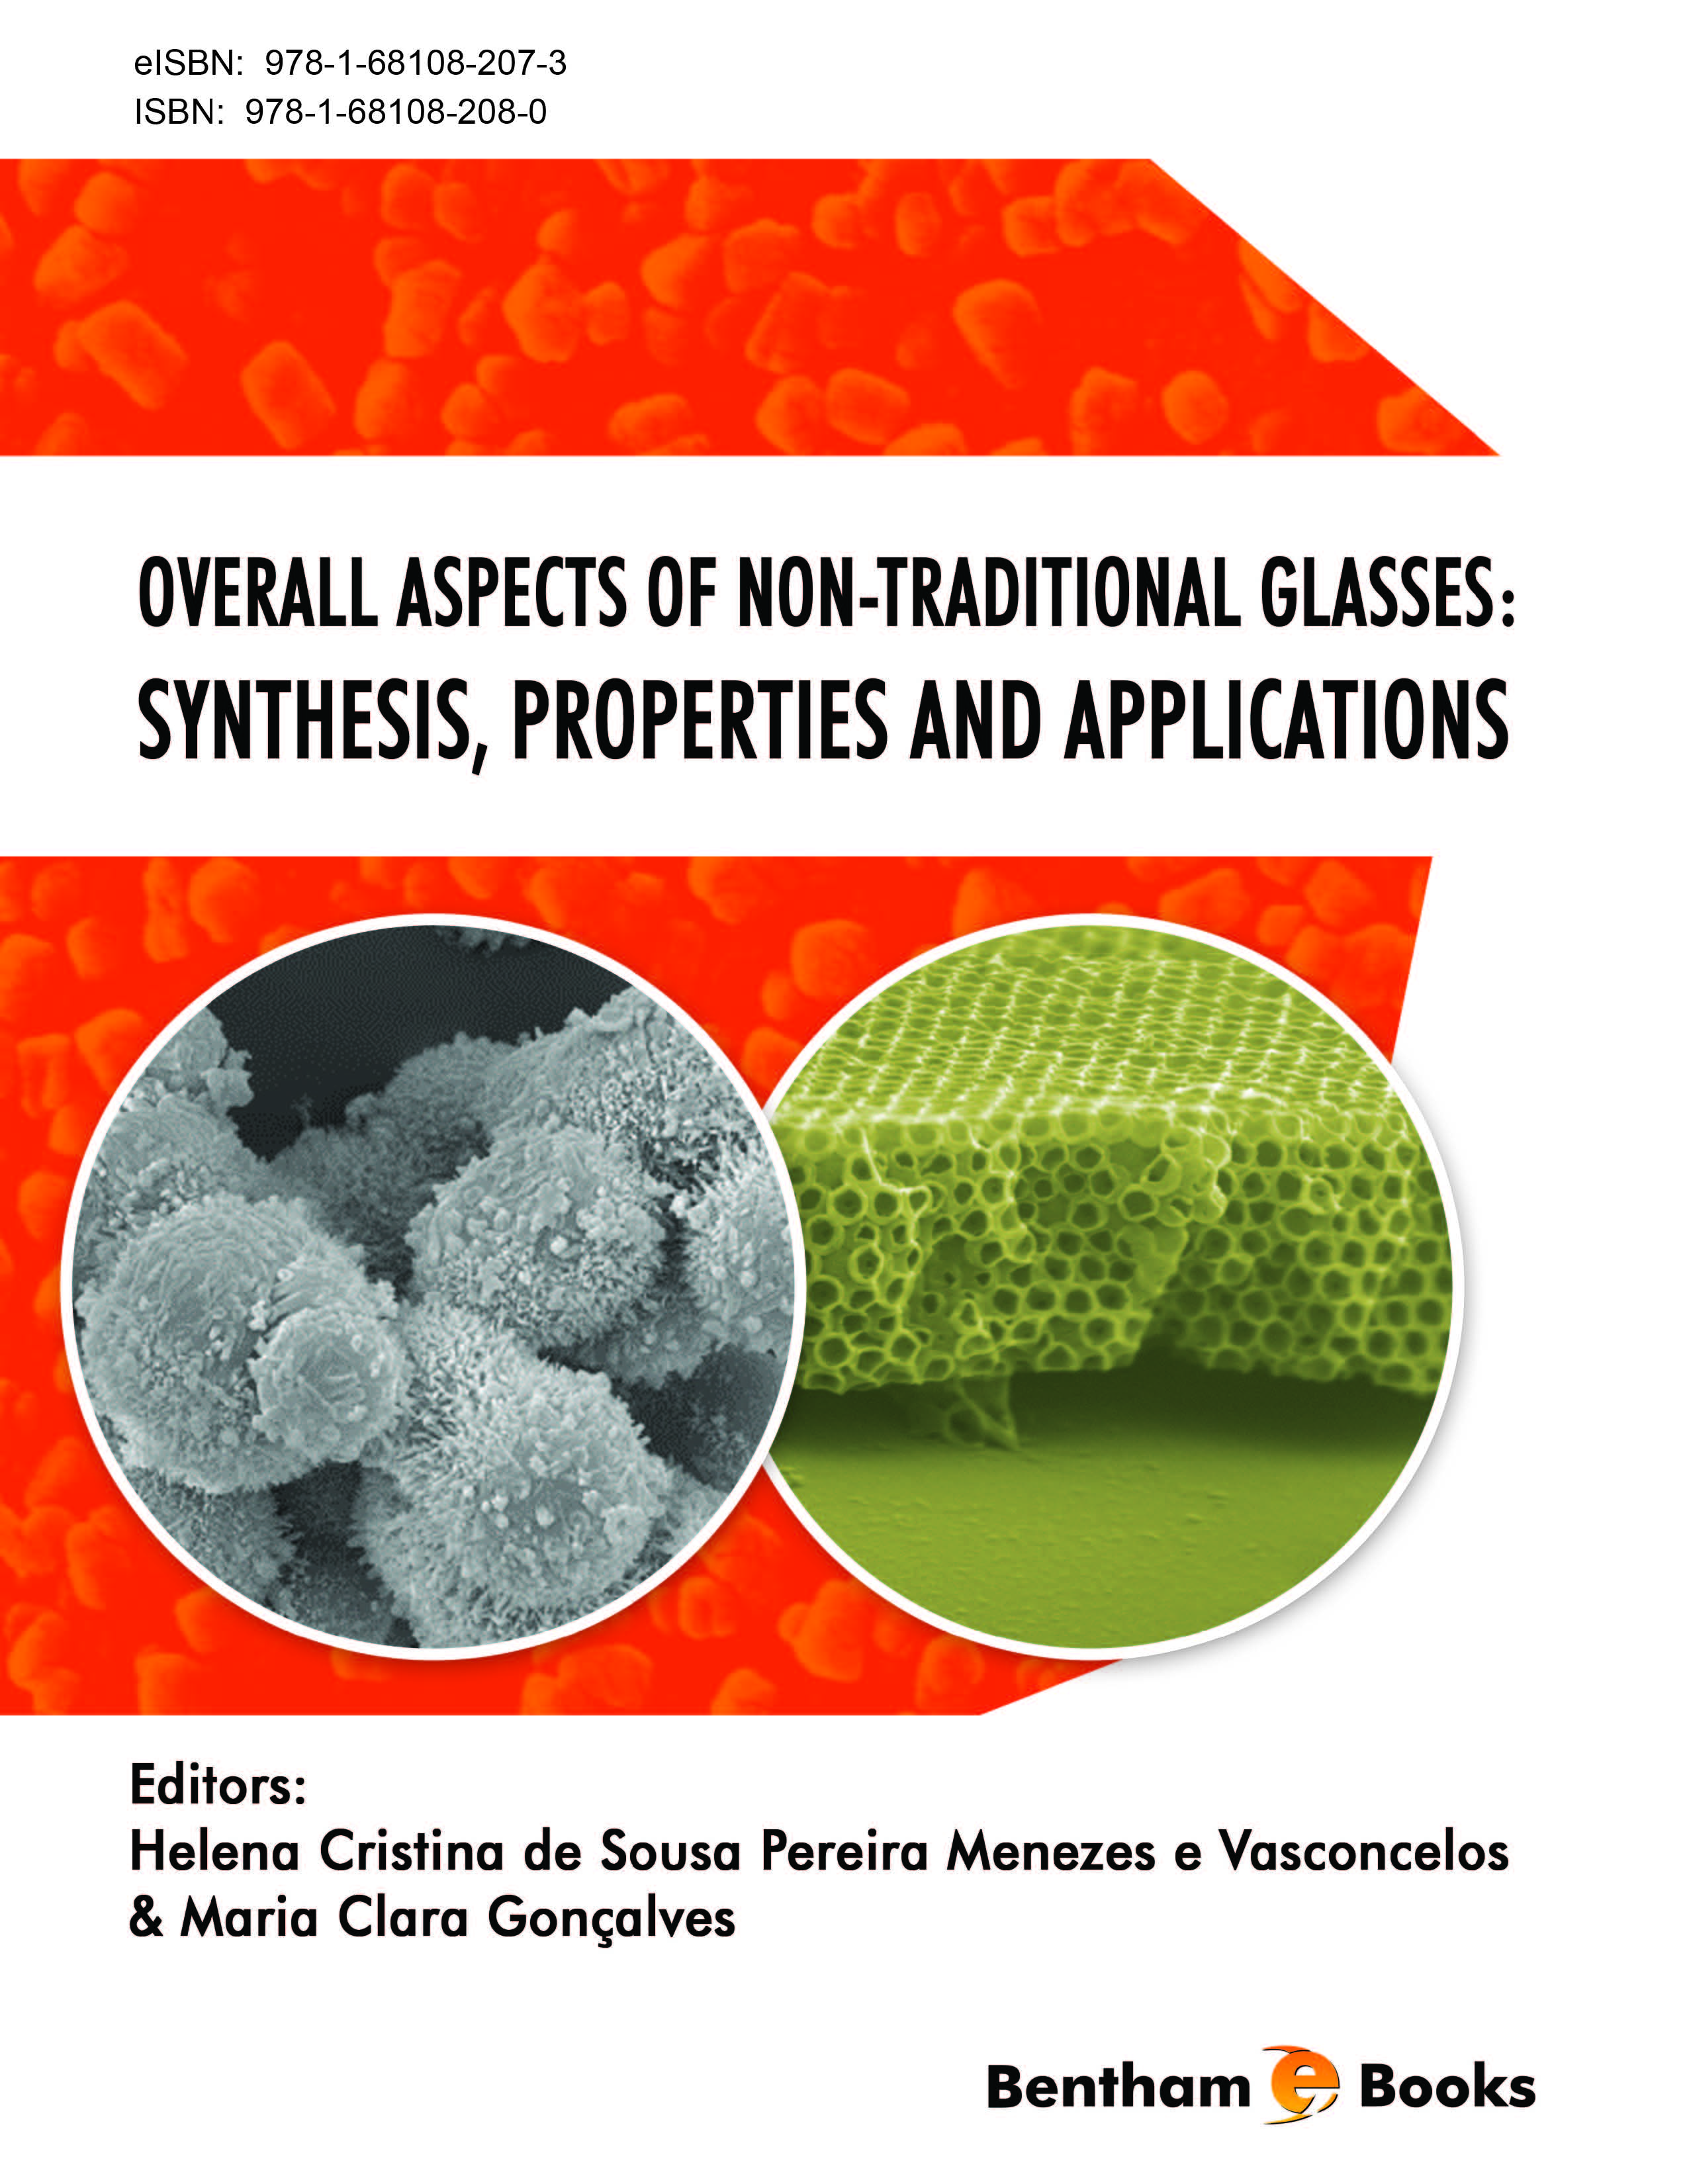 Overall Aspects of Non-Traditional Glasses: Synthesis, Properties and Applications